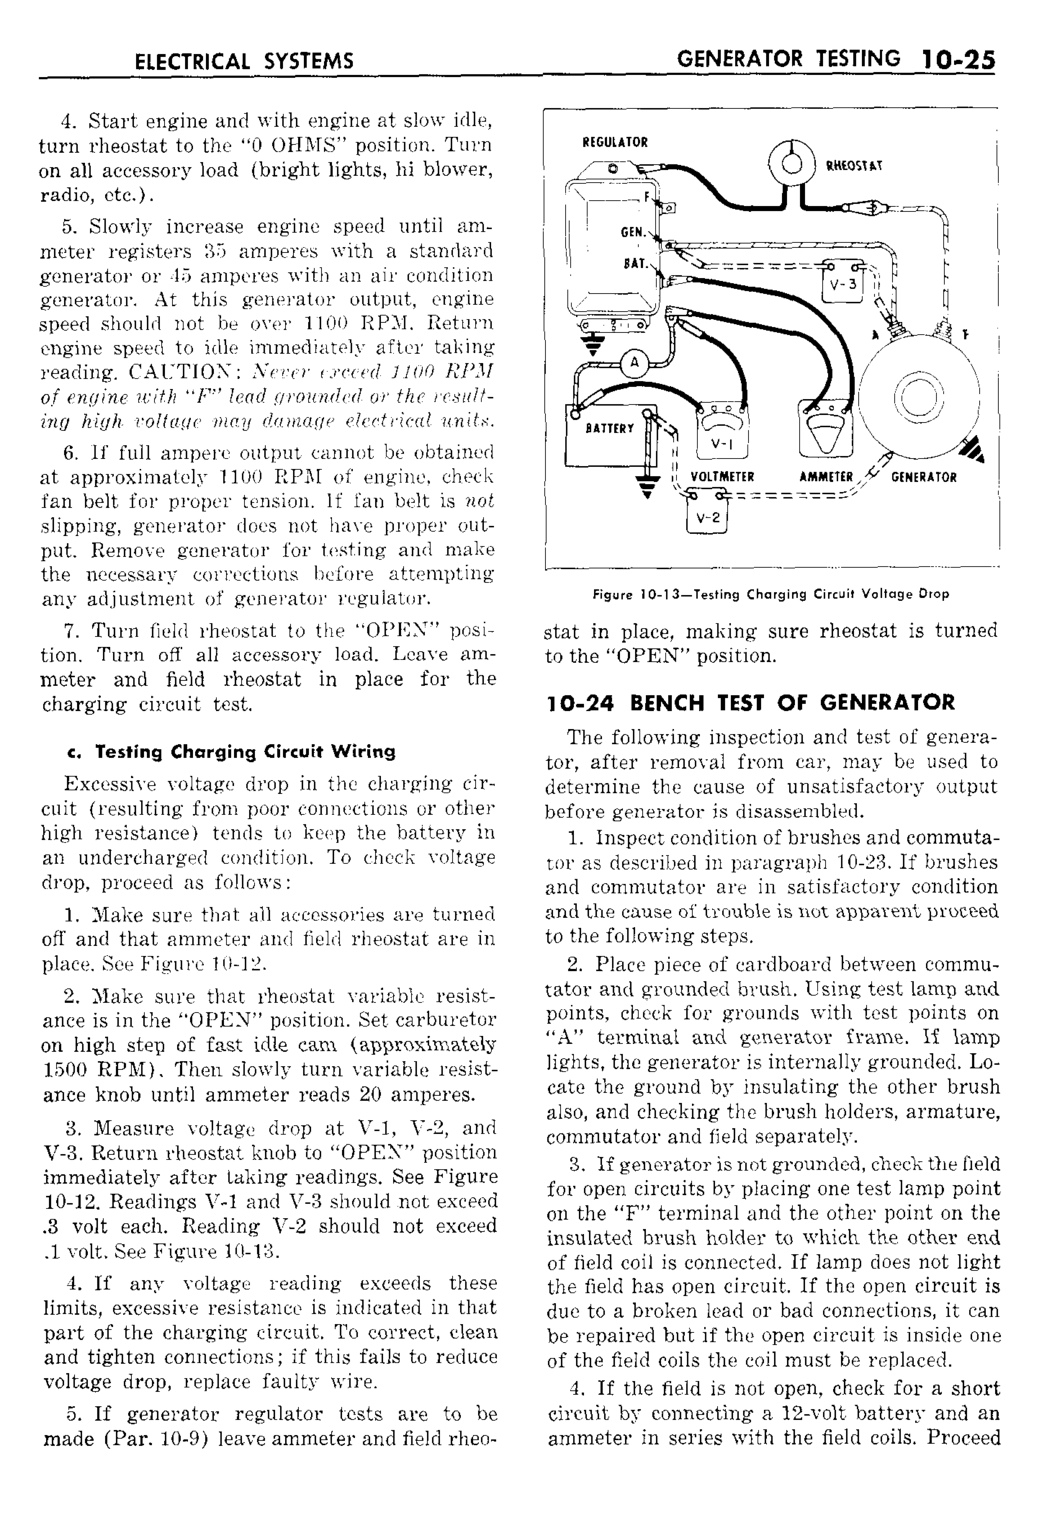 n_11 1959 Buick Shop Manual - Electrical Systems-025-025.jpg